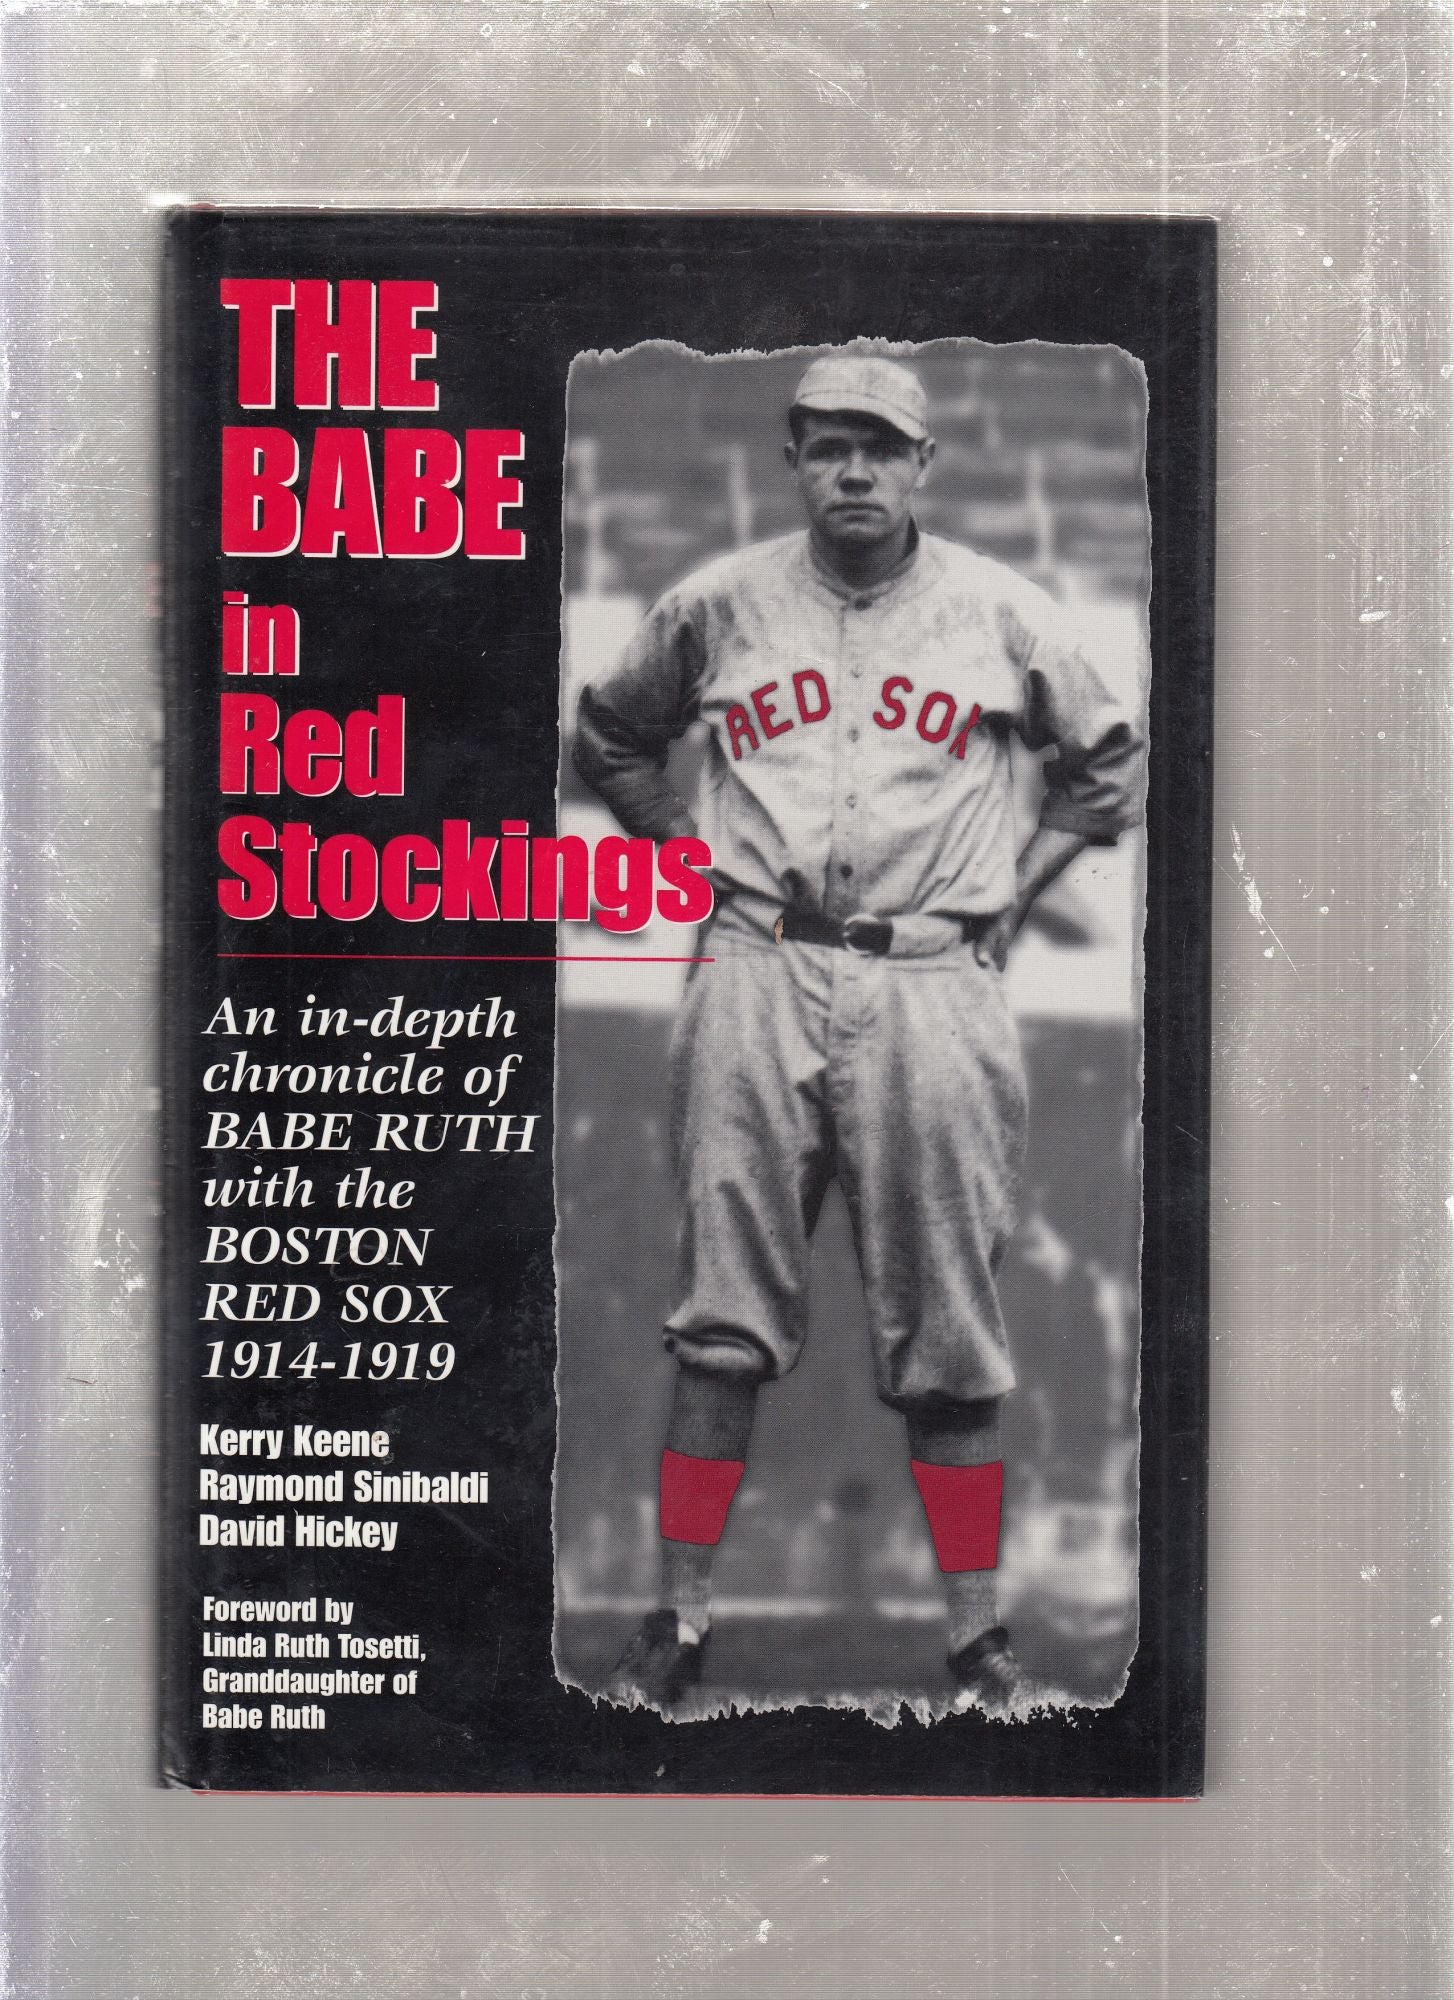 The Babe In Red Stockings: An In-depth Ccronicle of Babe Ruth with the  Boston Red Sox 1914-1919